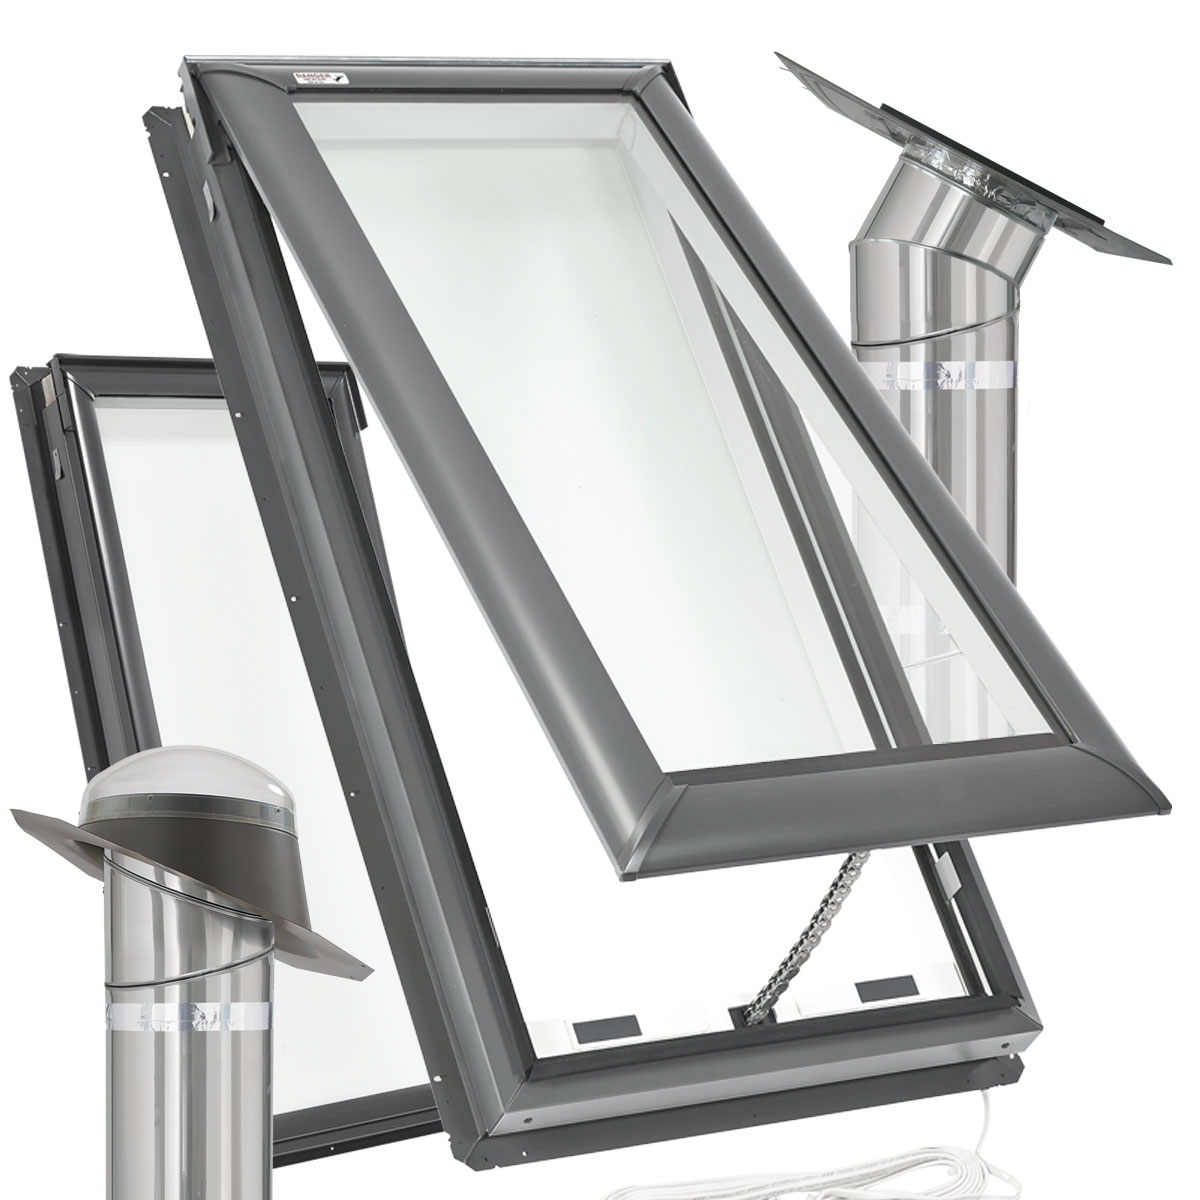 Lustercraft is a distributor of Velux skylights